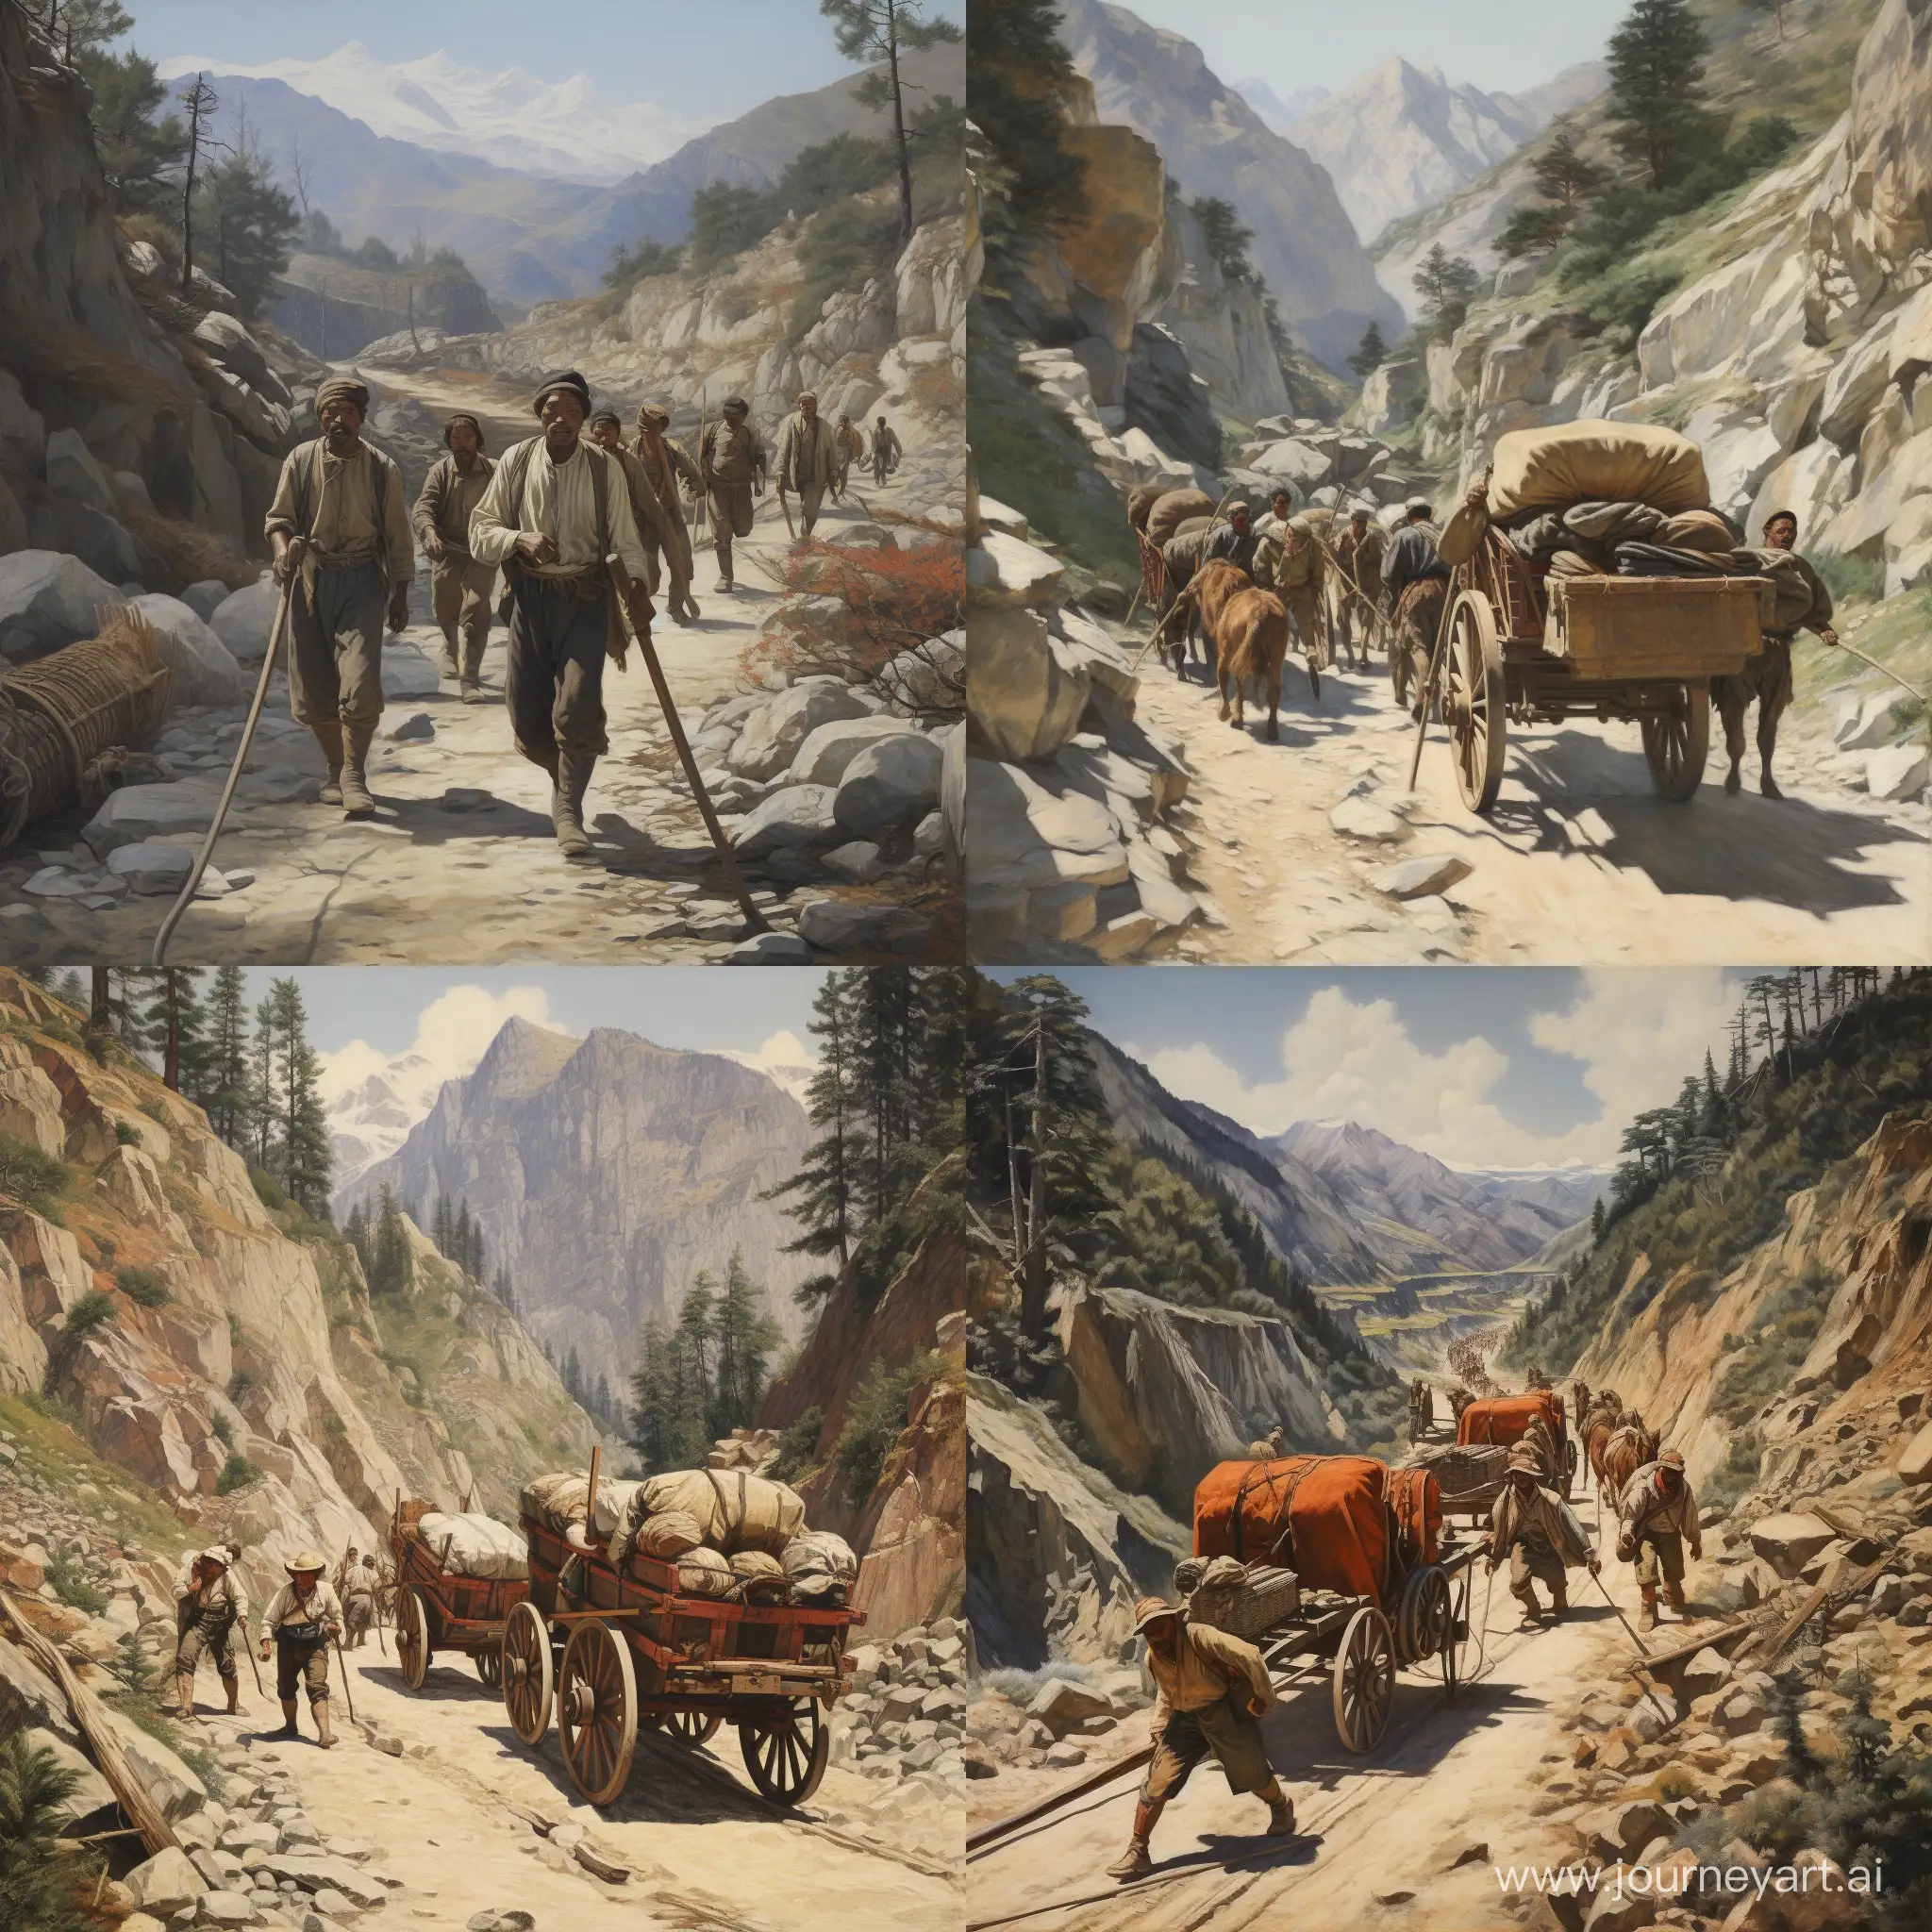 Chinese-Workers-Constructing-the-Great-Sierra-Wagon-Road